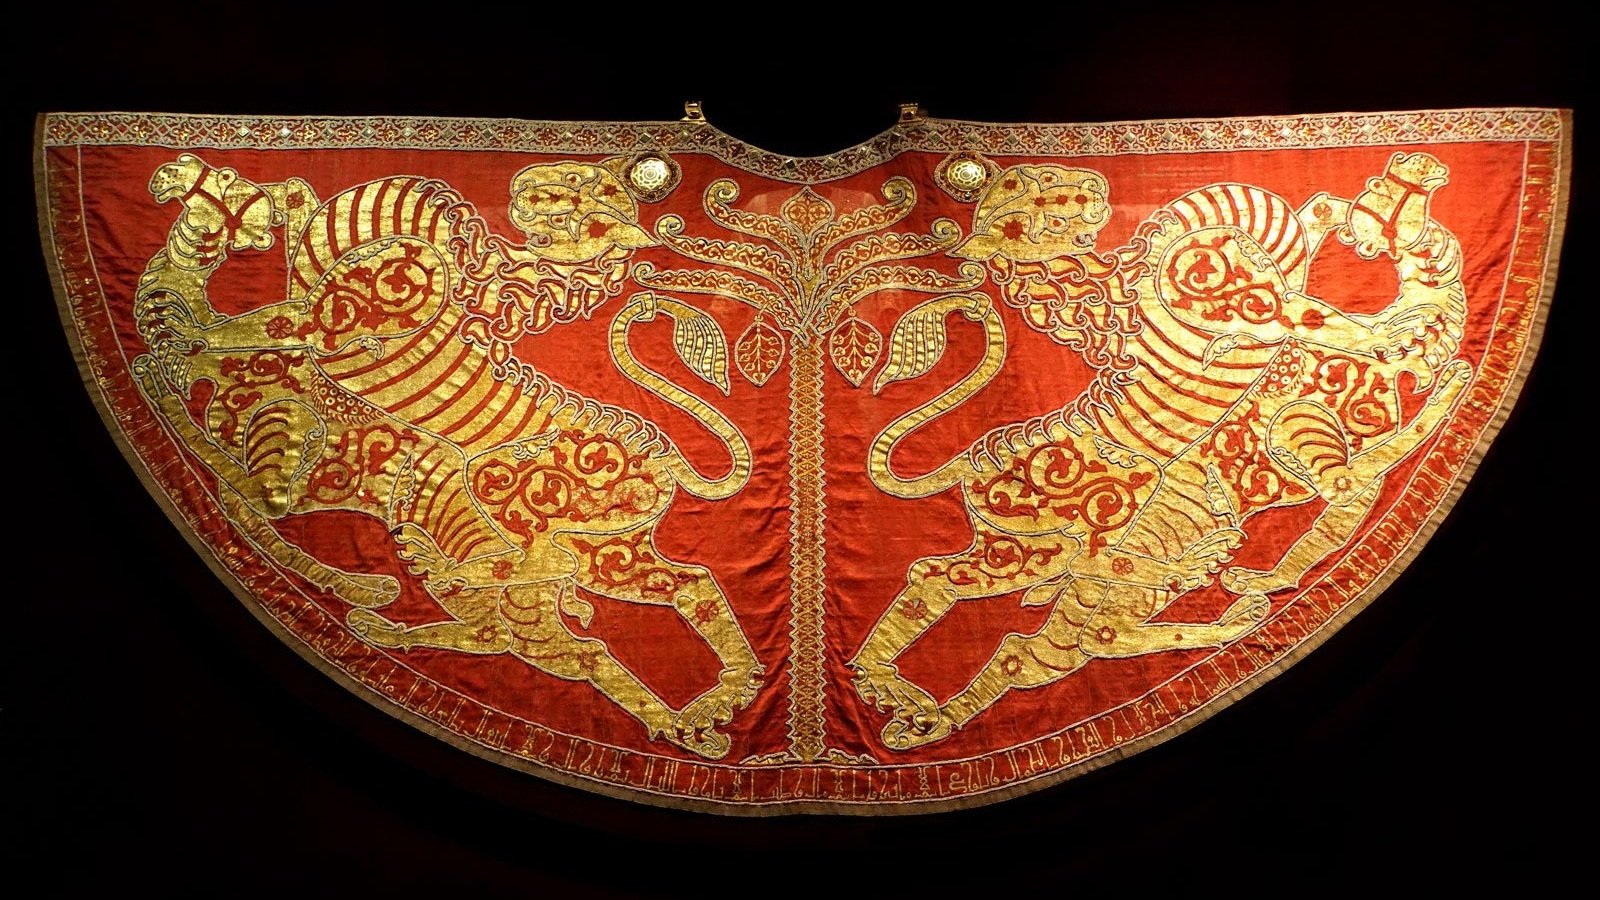 Coronation robes of the Sicilian Norman kings, now in Vienna's Imperial Treasury